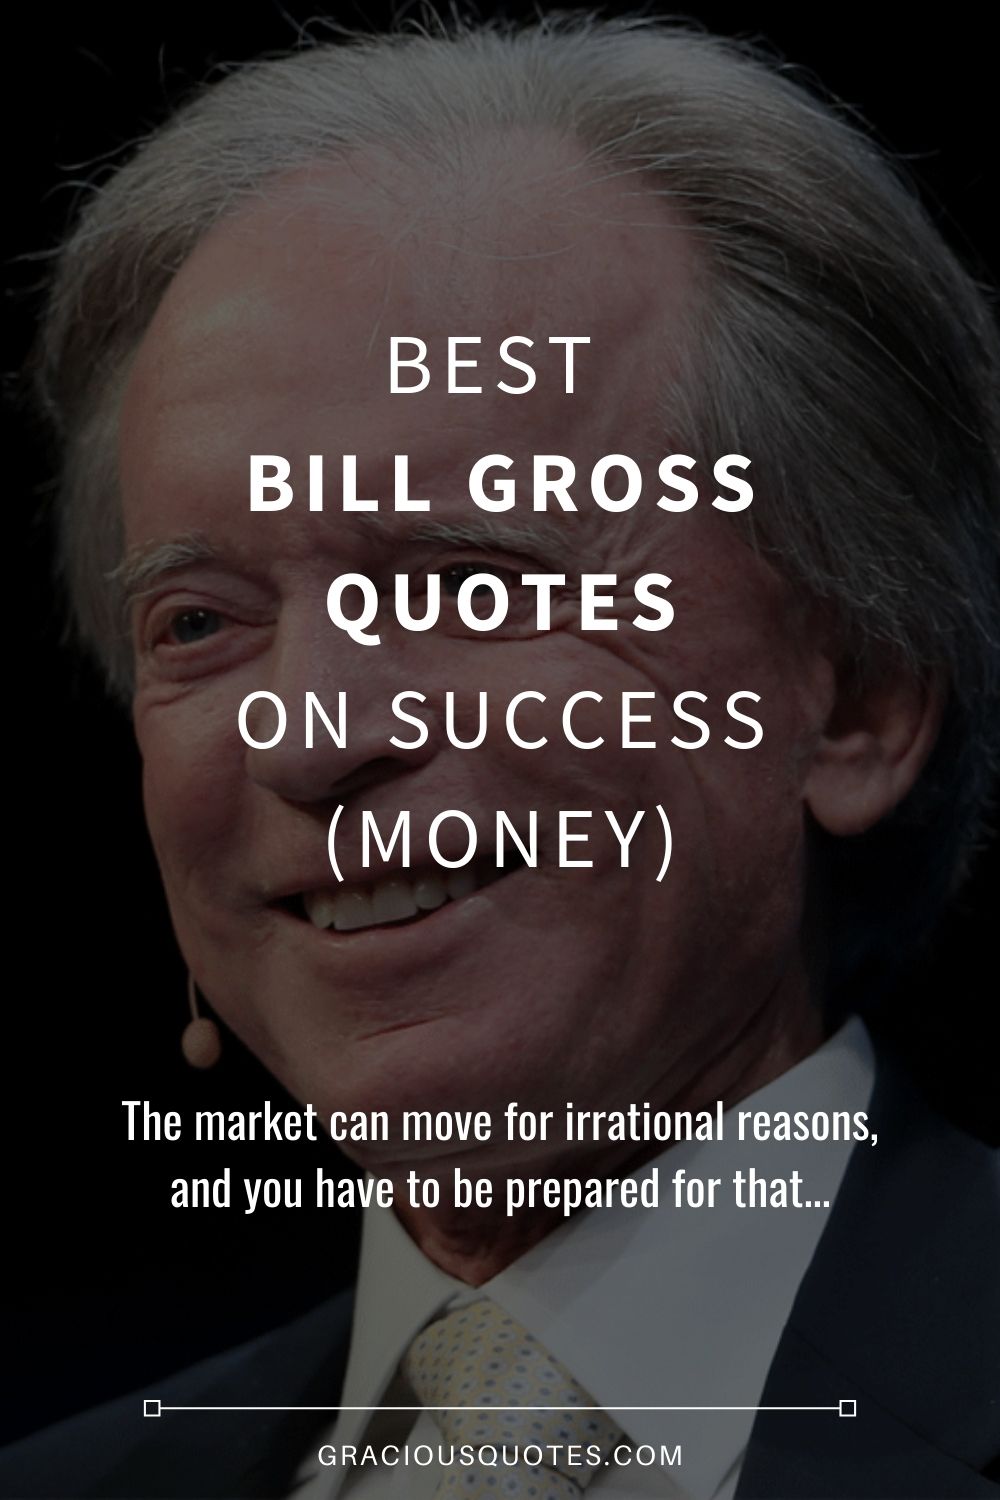 Best Bill Gross Quotes on Success (MONEY) - Gracious Quotes